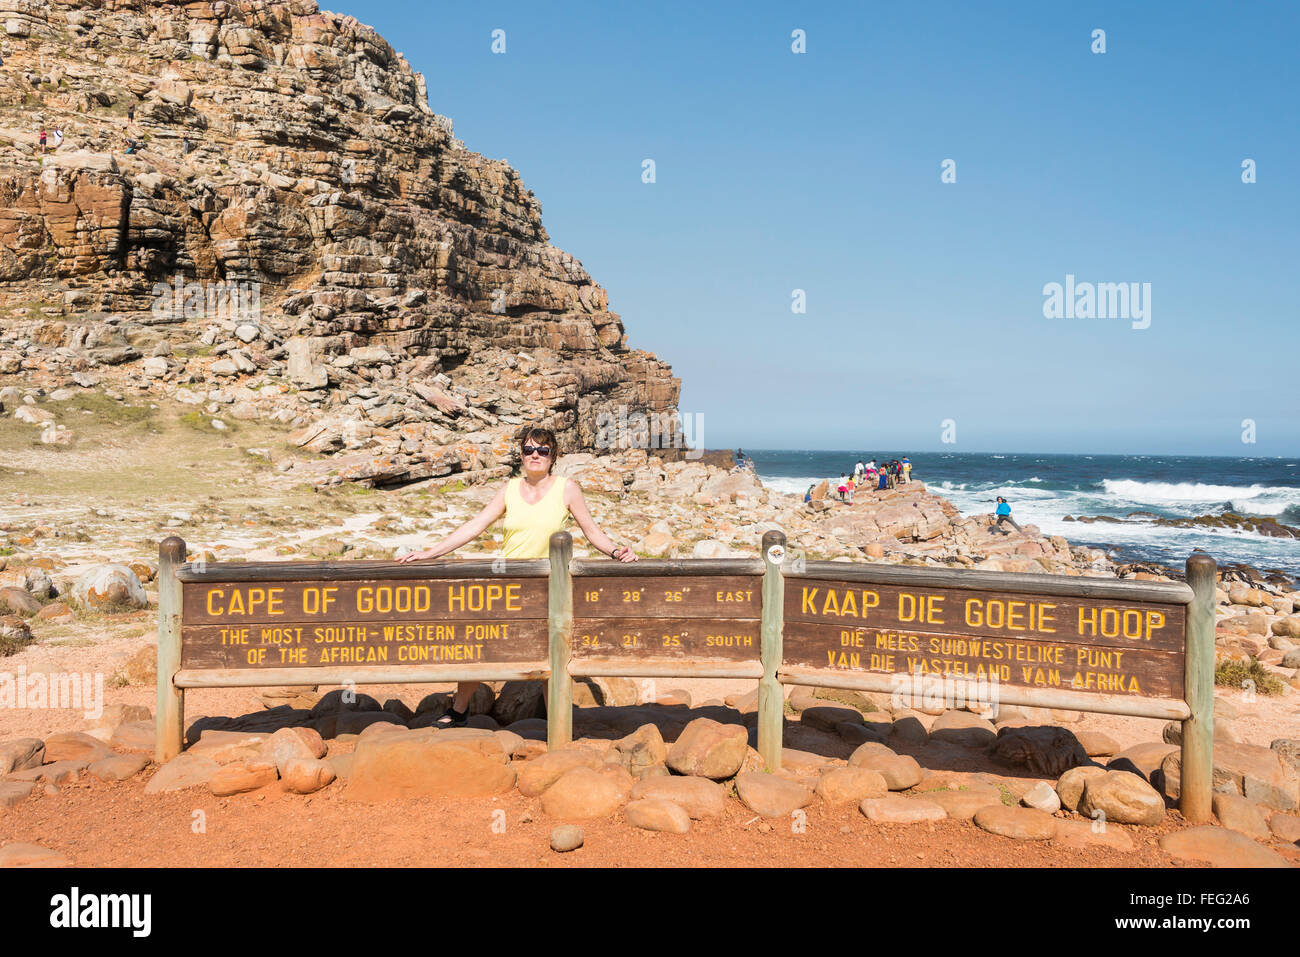 Female tourist by Cape of Good Hope sign, Cape Peninsula, City of Cape Town, Western Cape Province, Republic of South Africa Stock Photo